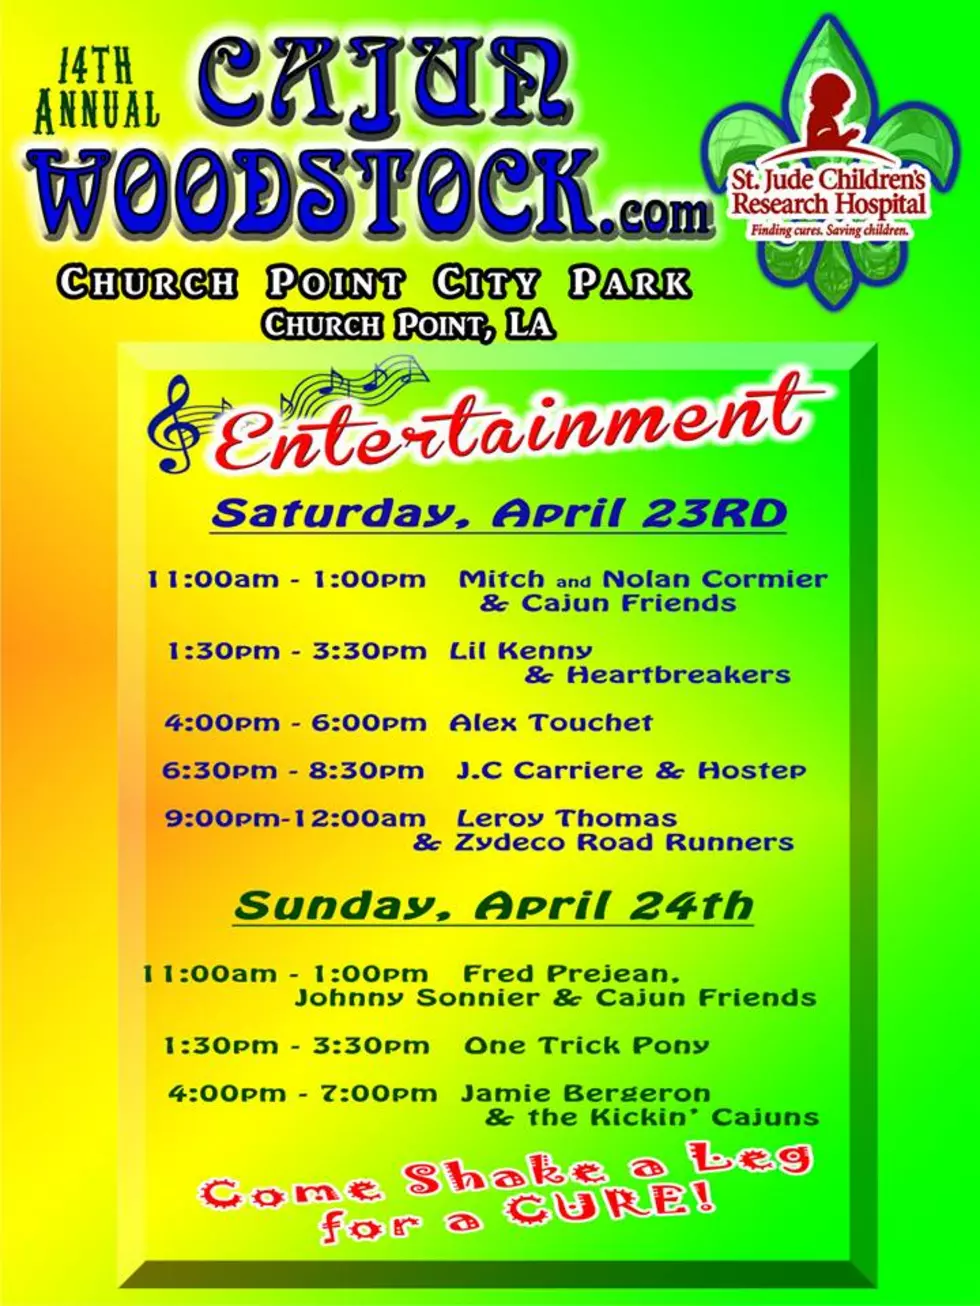 Cajun Woodstock to Benefit St. Jude Set for April 23-24 at Church Point City Park